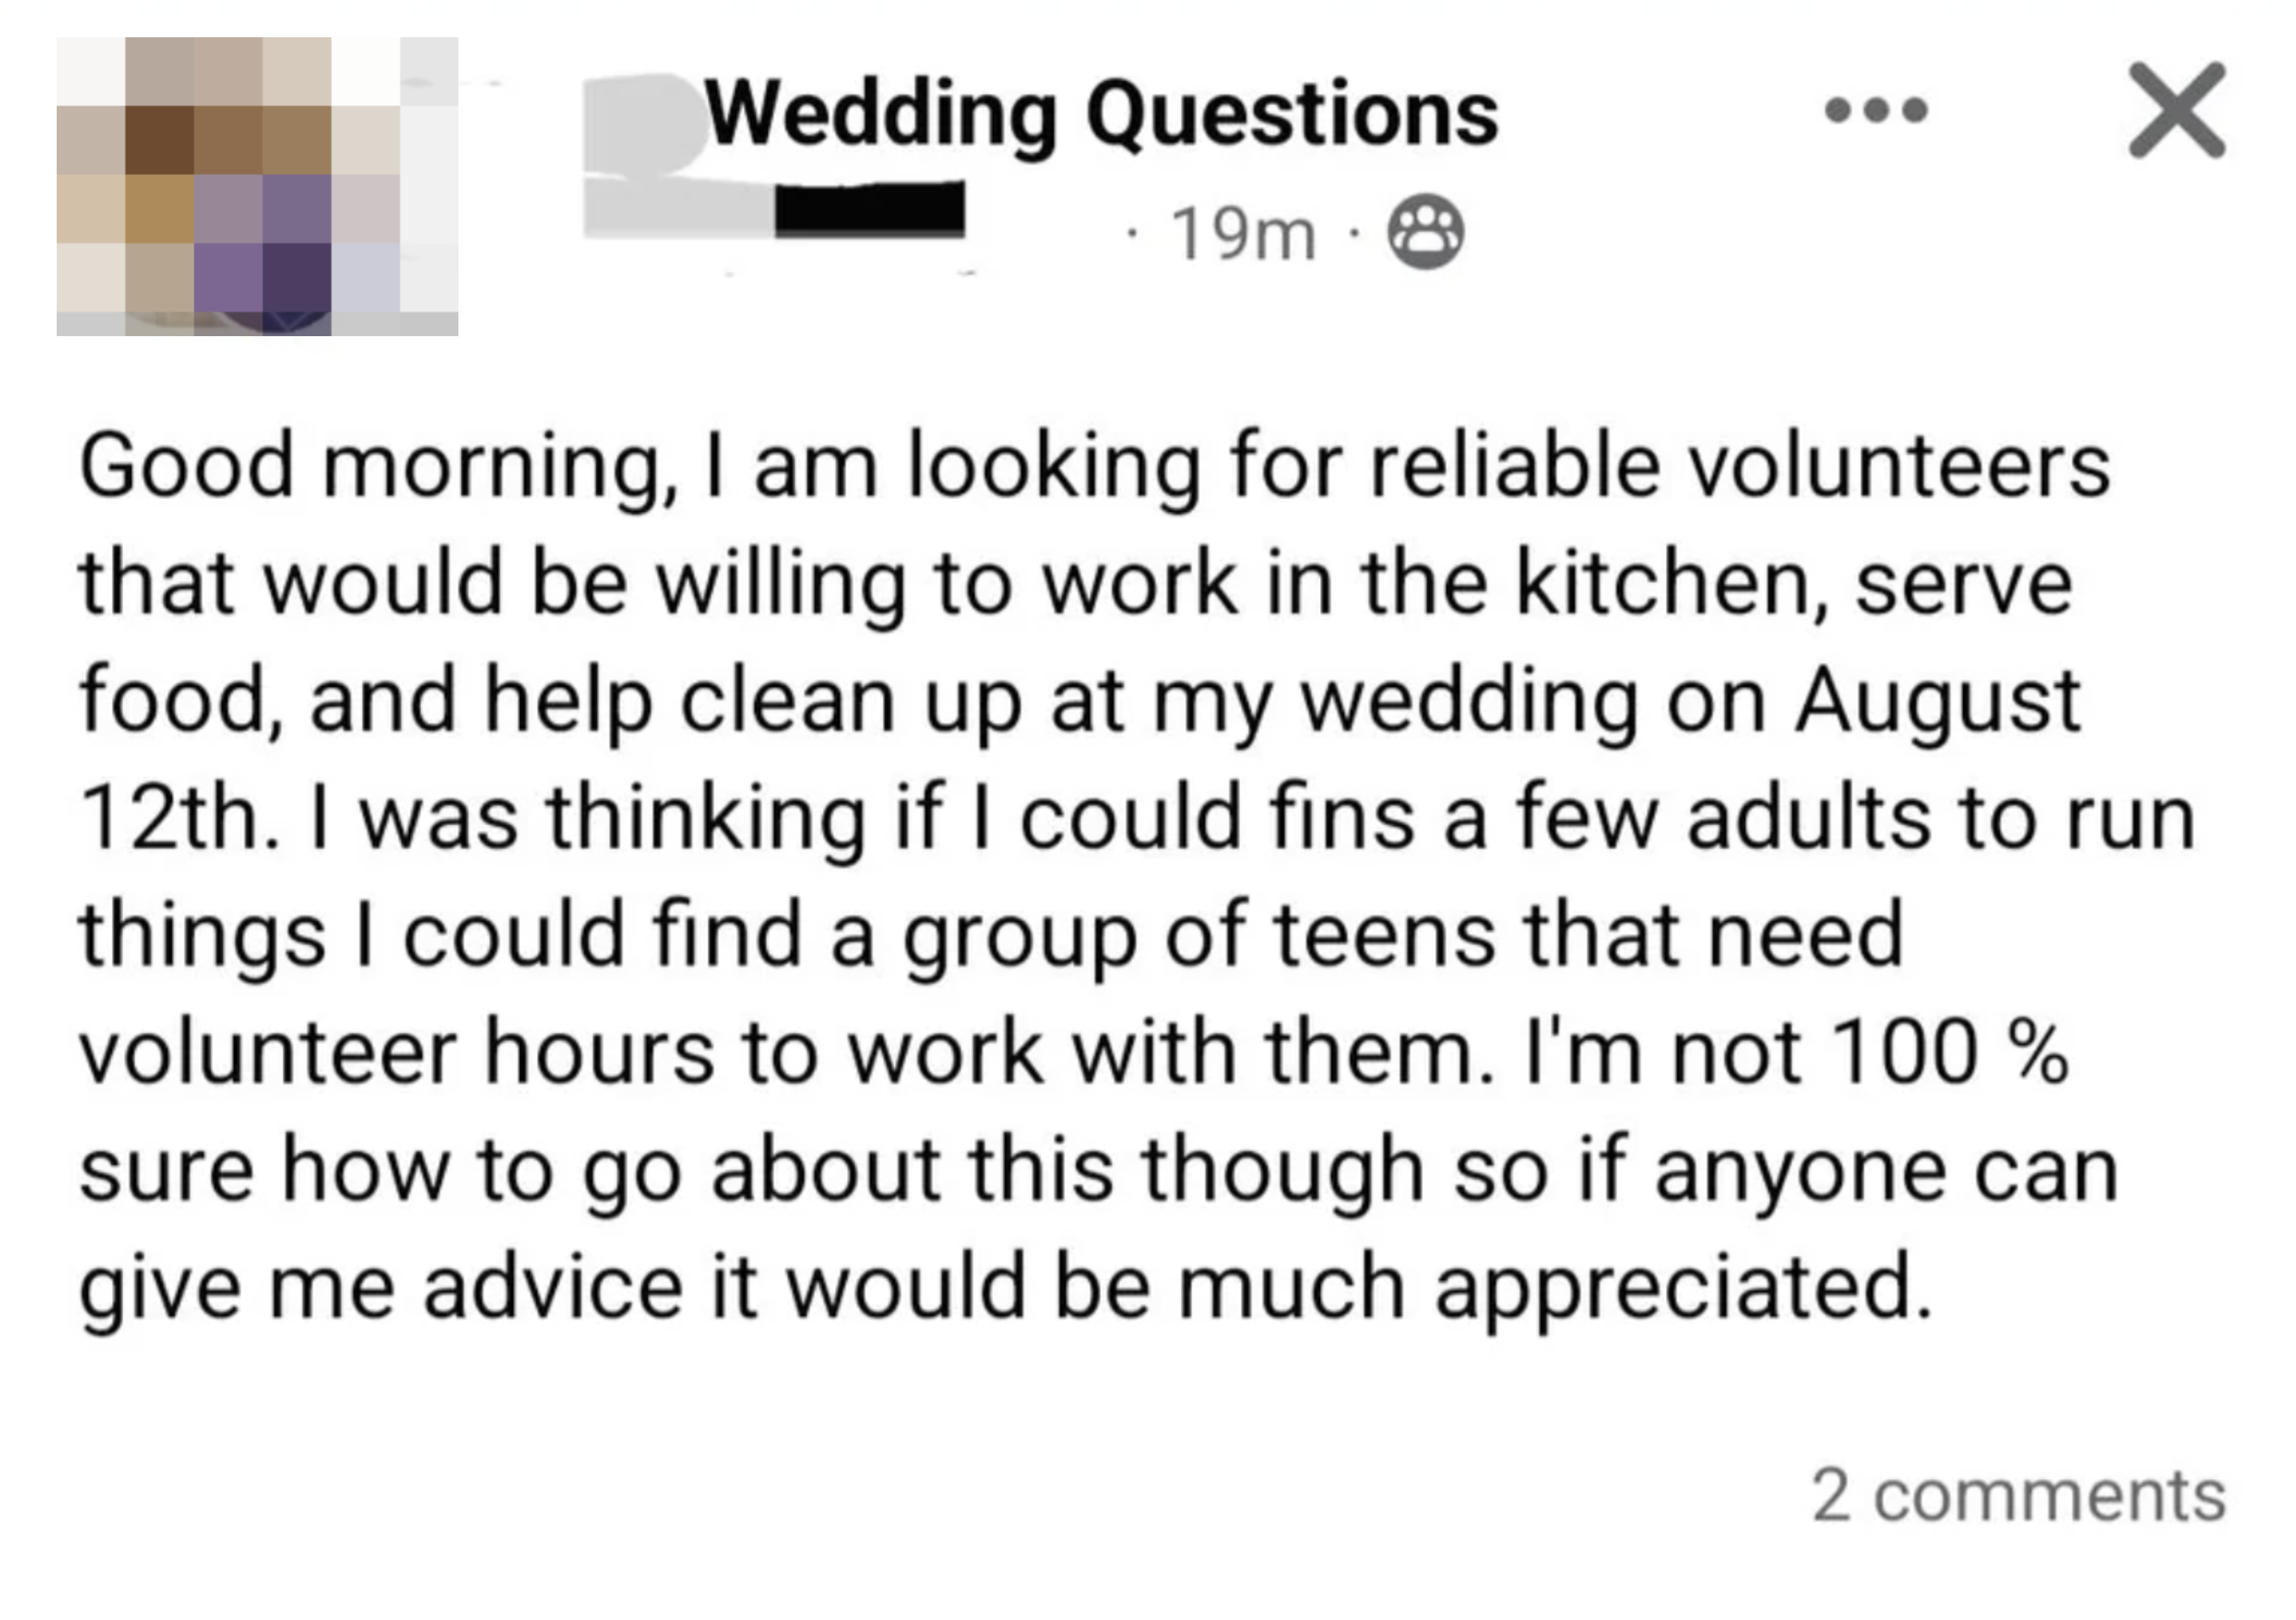 &quot;I am looking for reliable volunteers&quot;